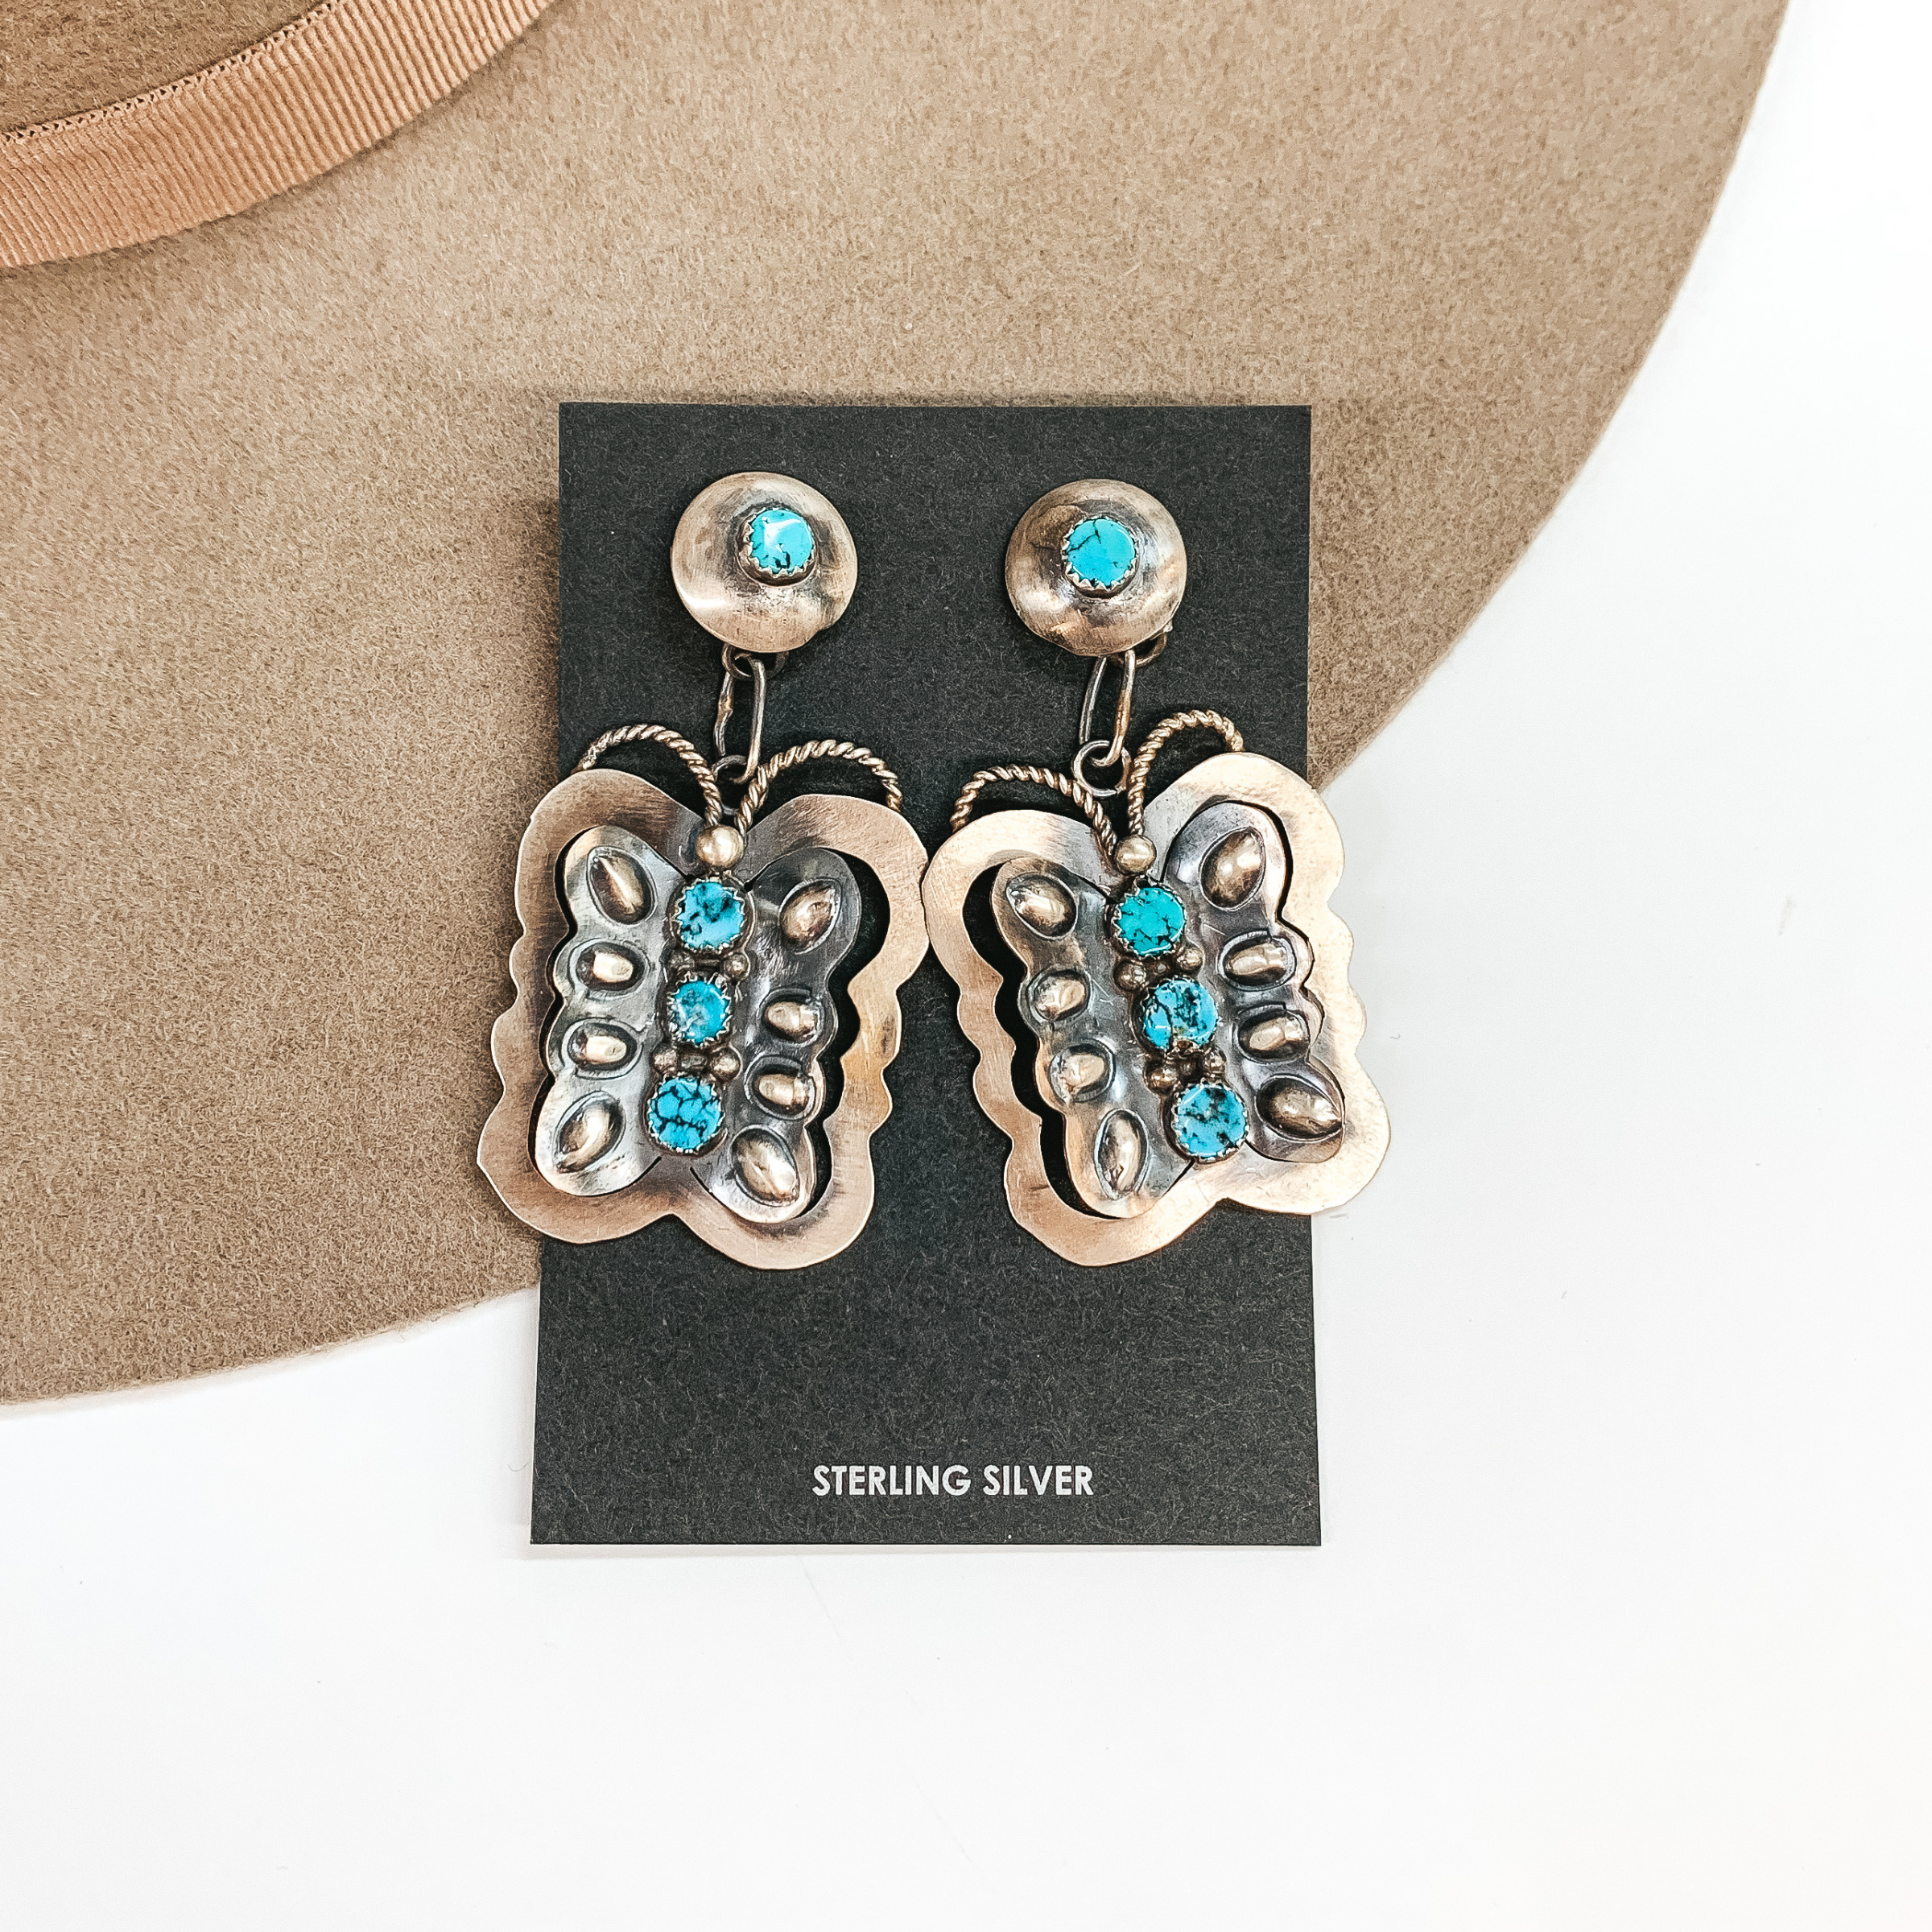 GTY | Navajo Handmade Sterling Silver Butterfly Earrings with Turquoise Stones - Giddy Up Glamour Boutique